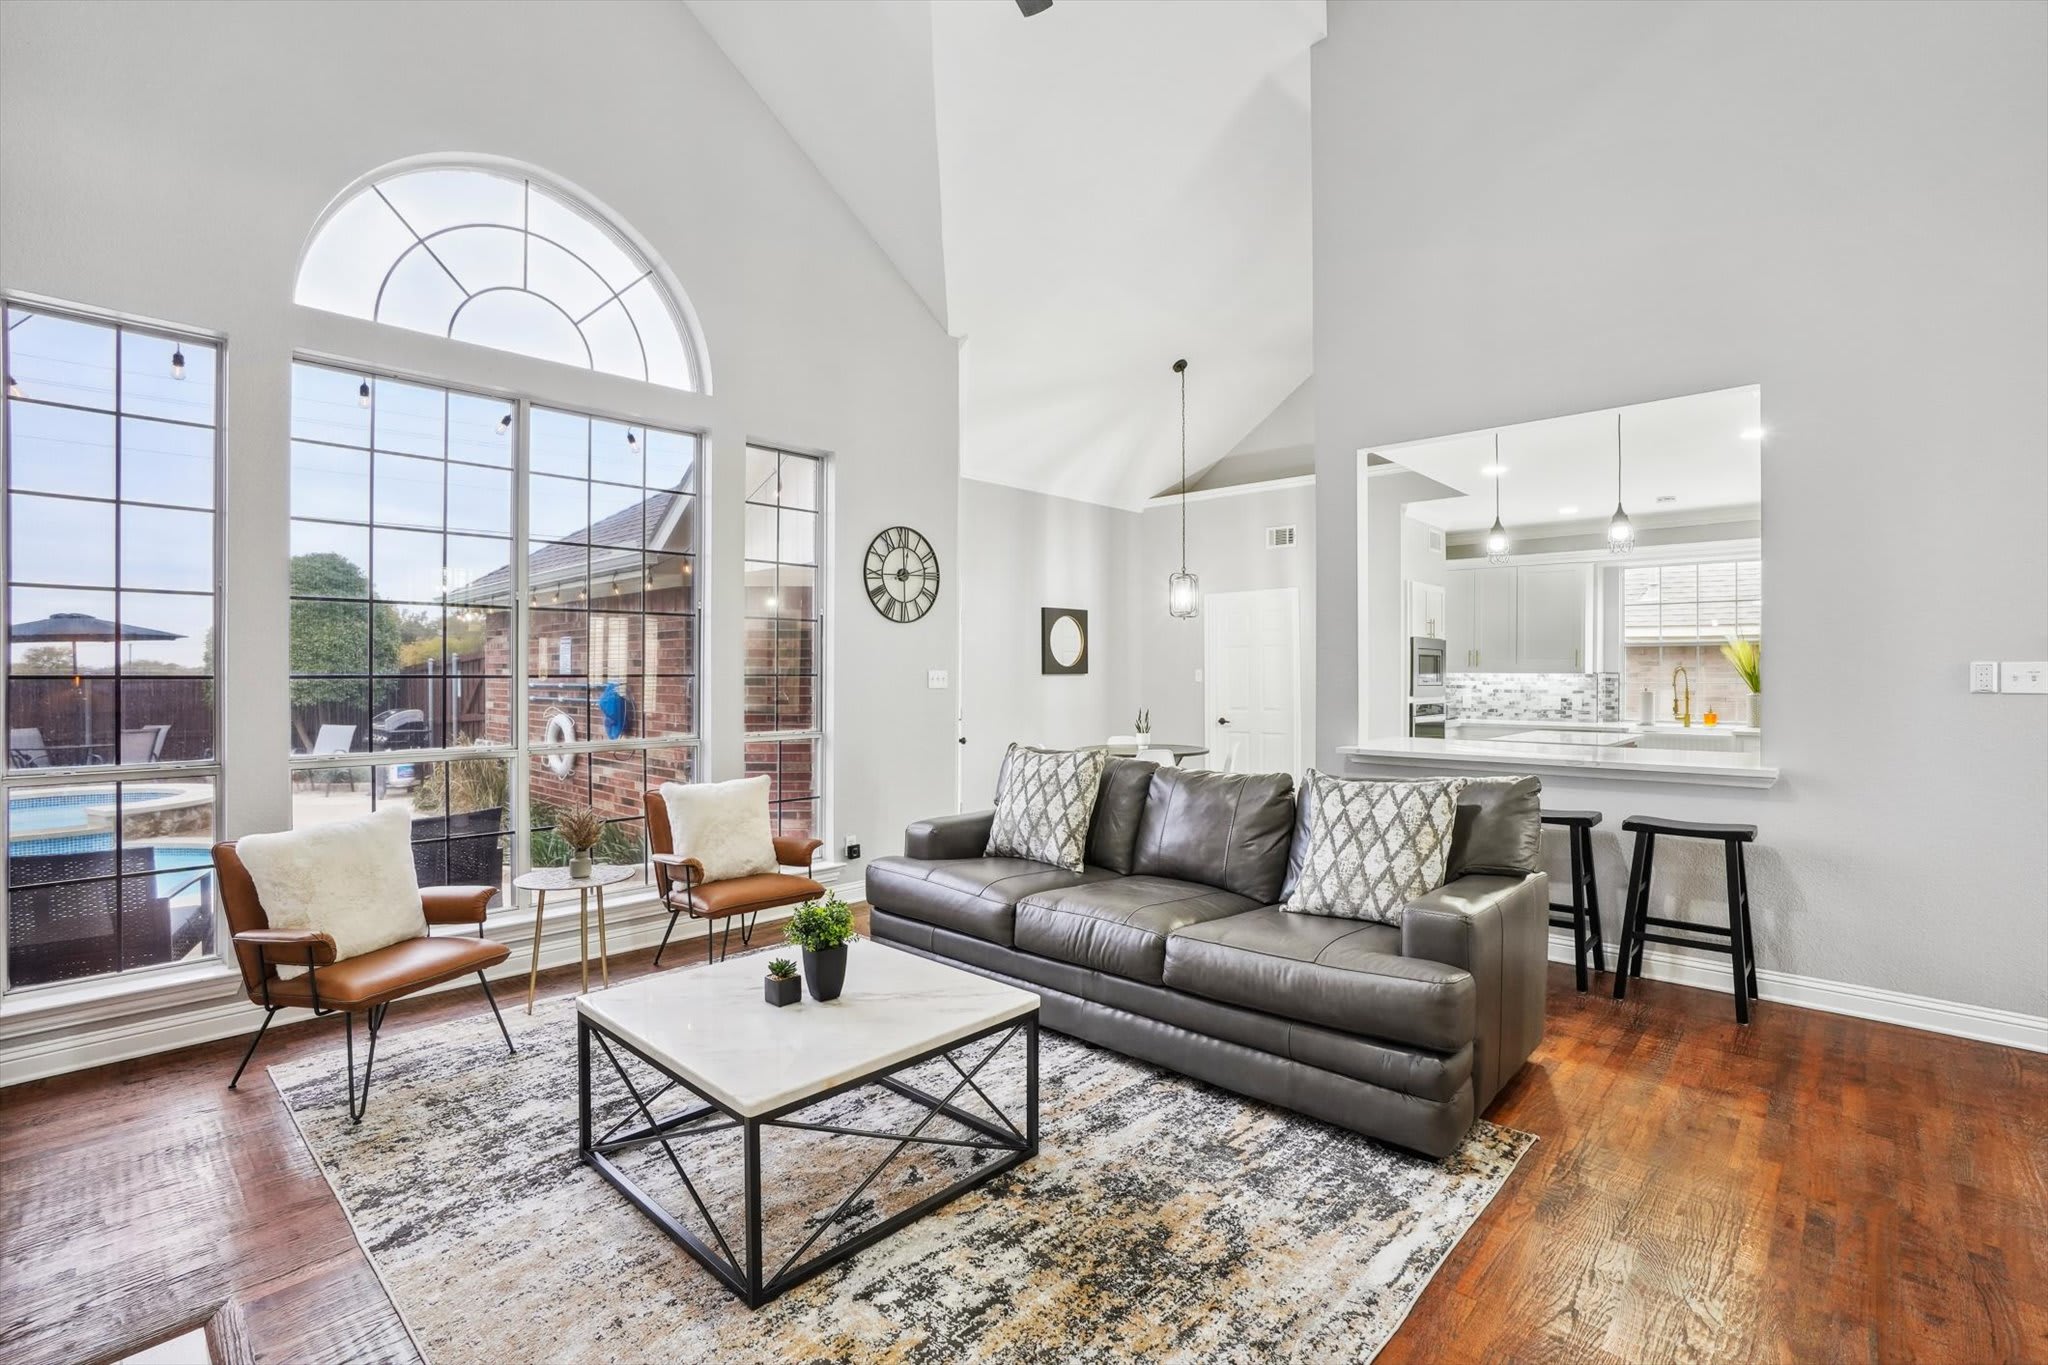 With high-vaulted ceilings and an impressive wall of windows, this living room is a modern, multi-functional space just waiting for you to experience it!